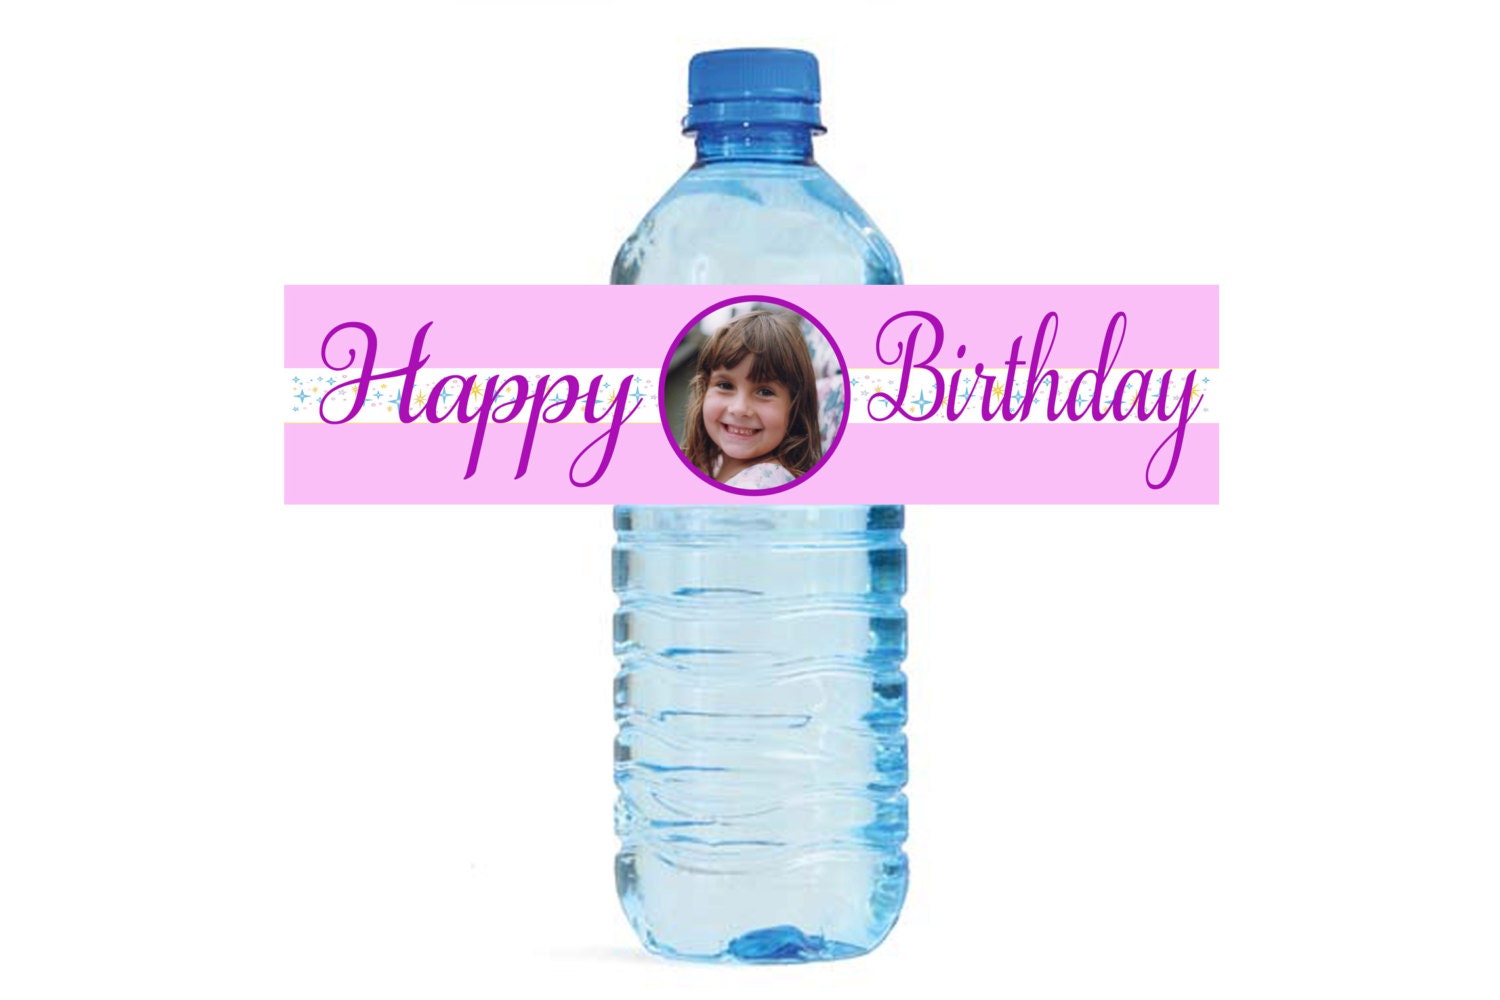 personalized-happy-birthday-party-water-bottle-labels-with-name-happy